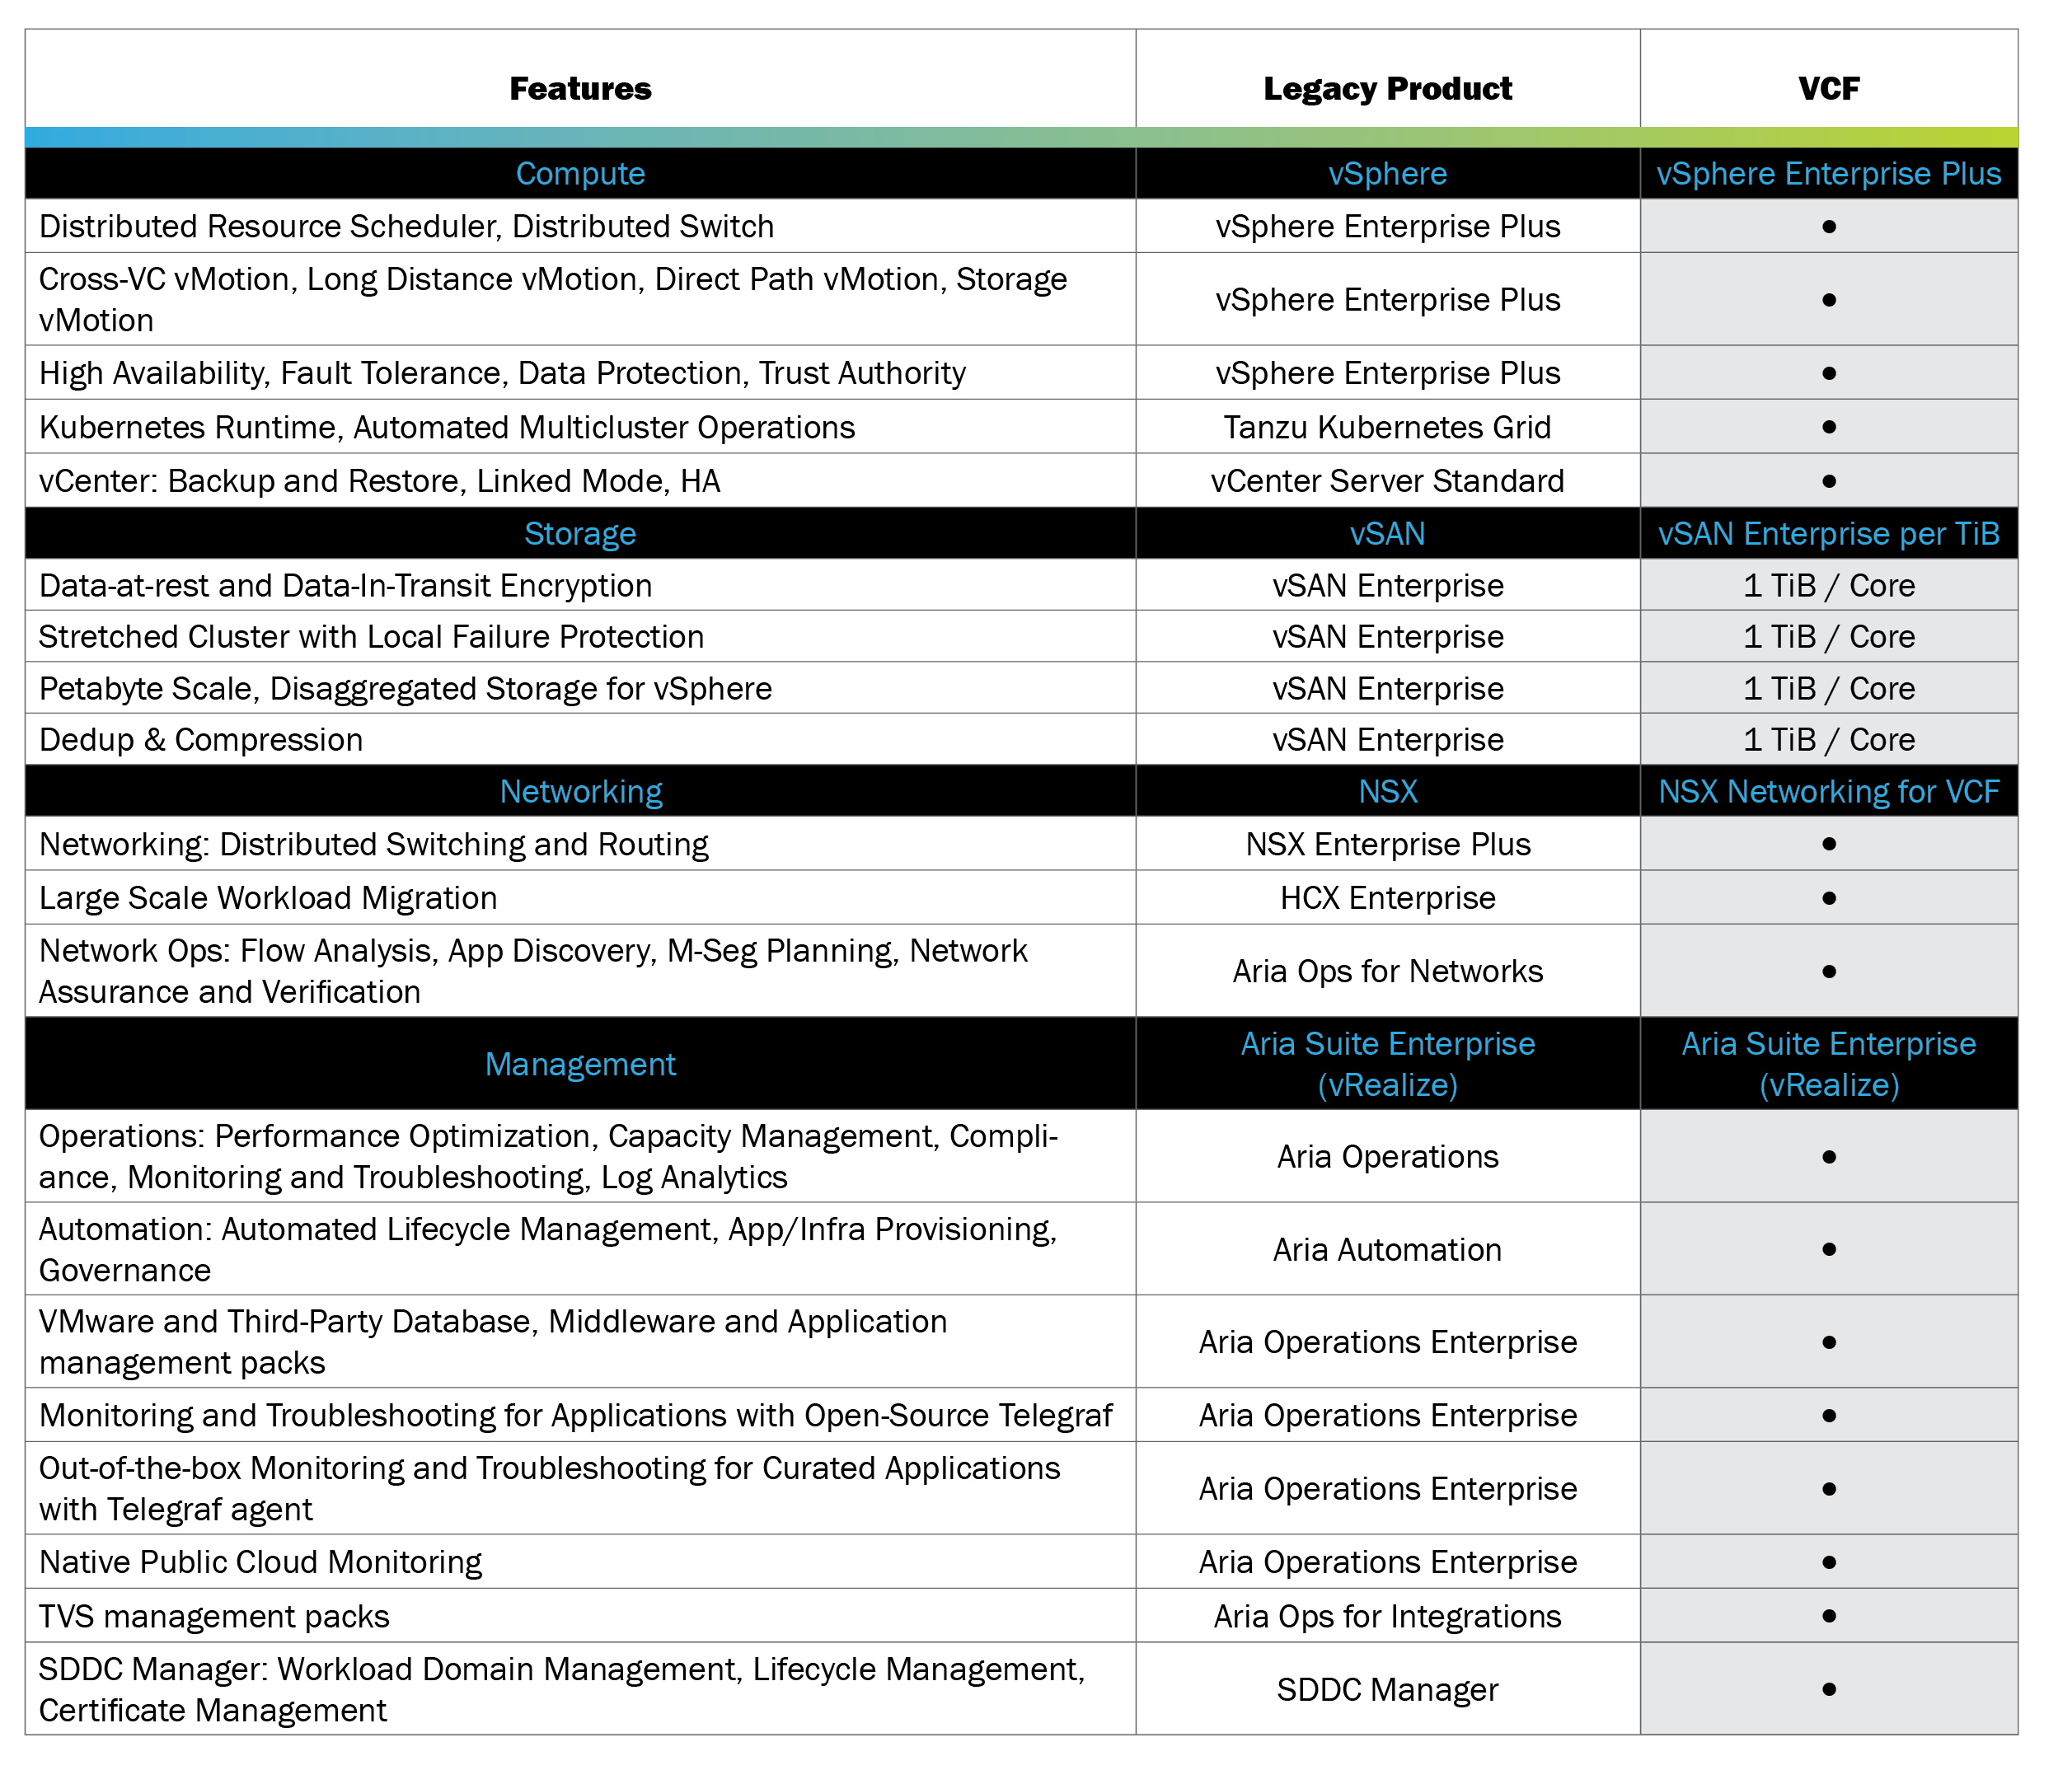 Table mapping legacy VMware product to new VCF offering.